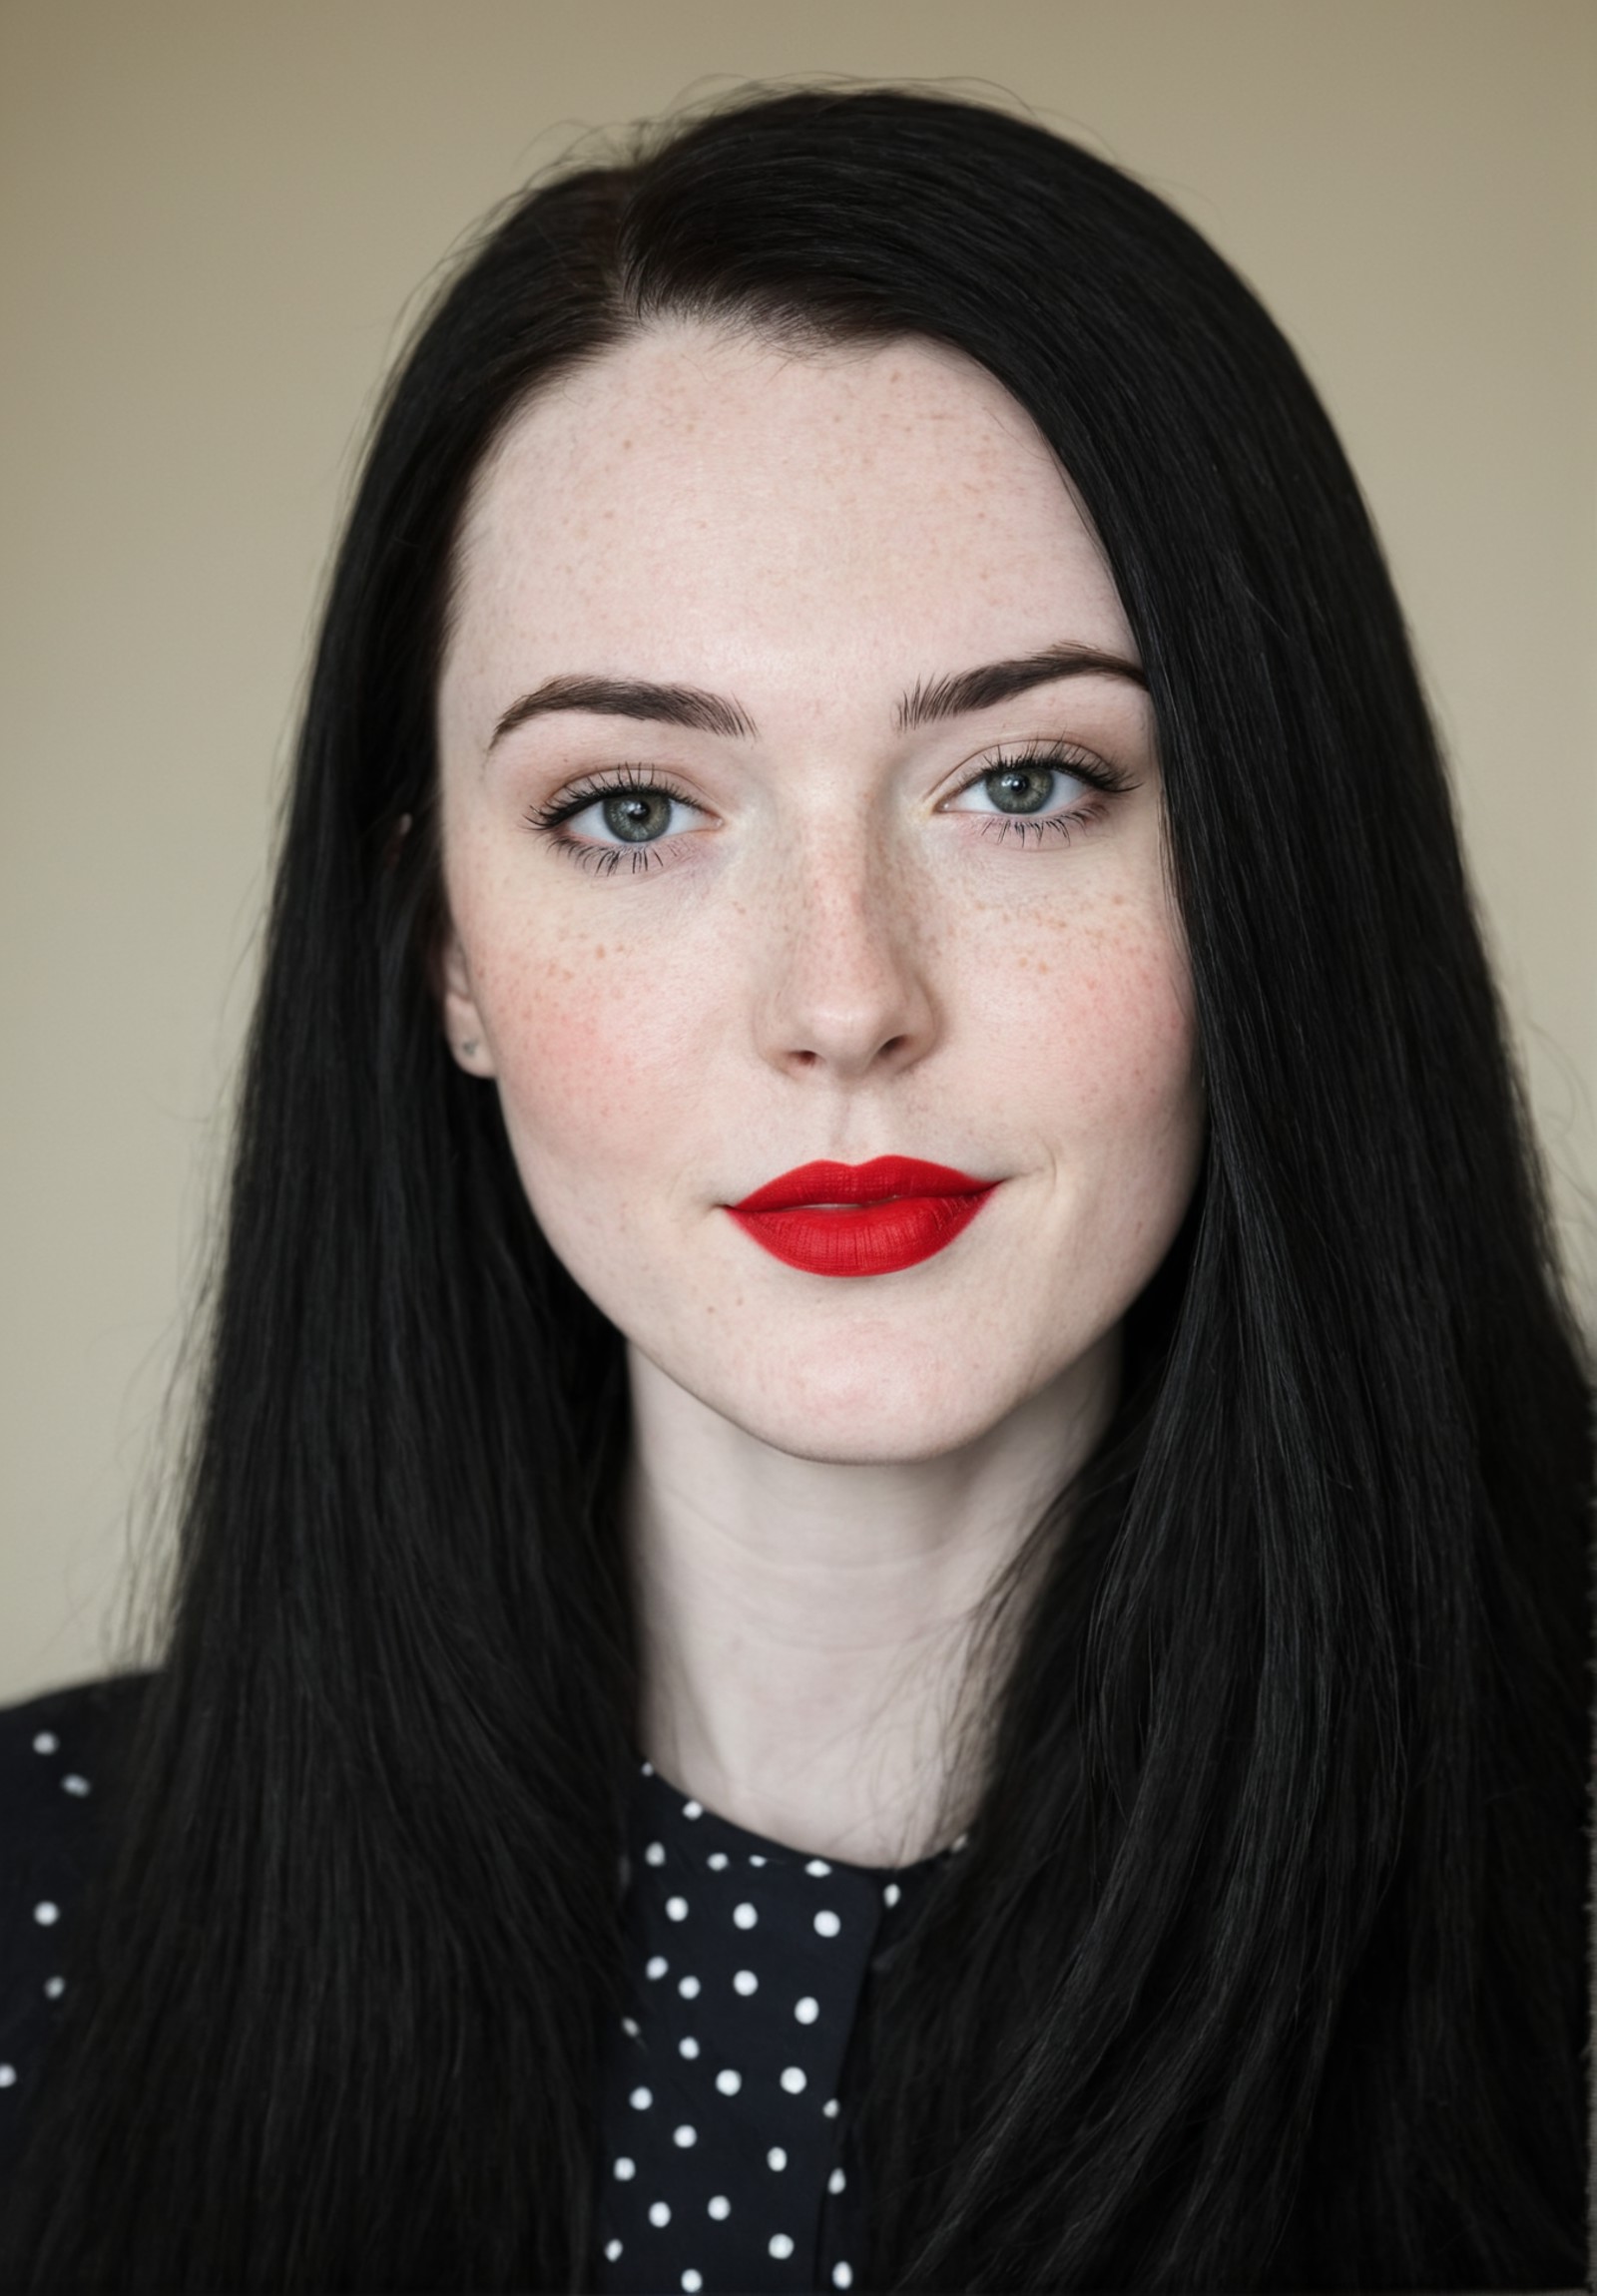 pale, pale skin, (freckles:0.5), black hair, smirk, living room background,
detailed face, detailed hair, fully clothed, e...